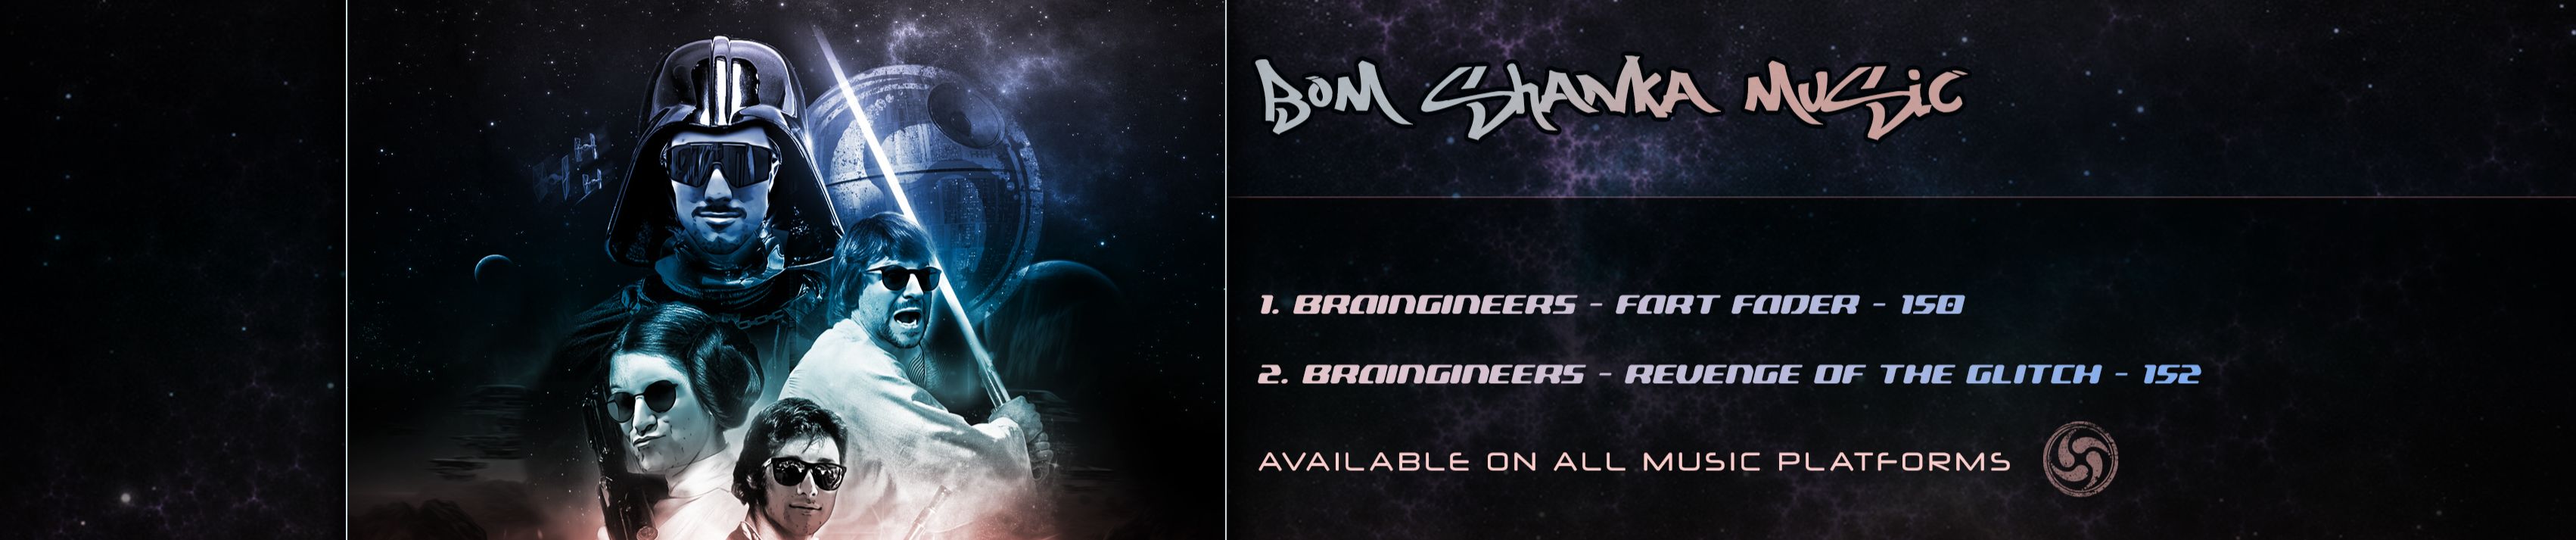 Stream BRAINGINEERS (BOM SHANKA MUSIC) music  Listen to songs, albums,  playlists for free on SoundCloud